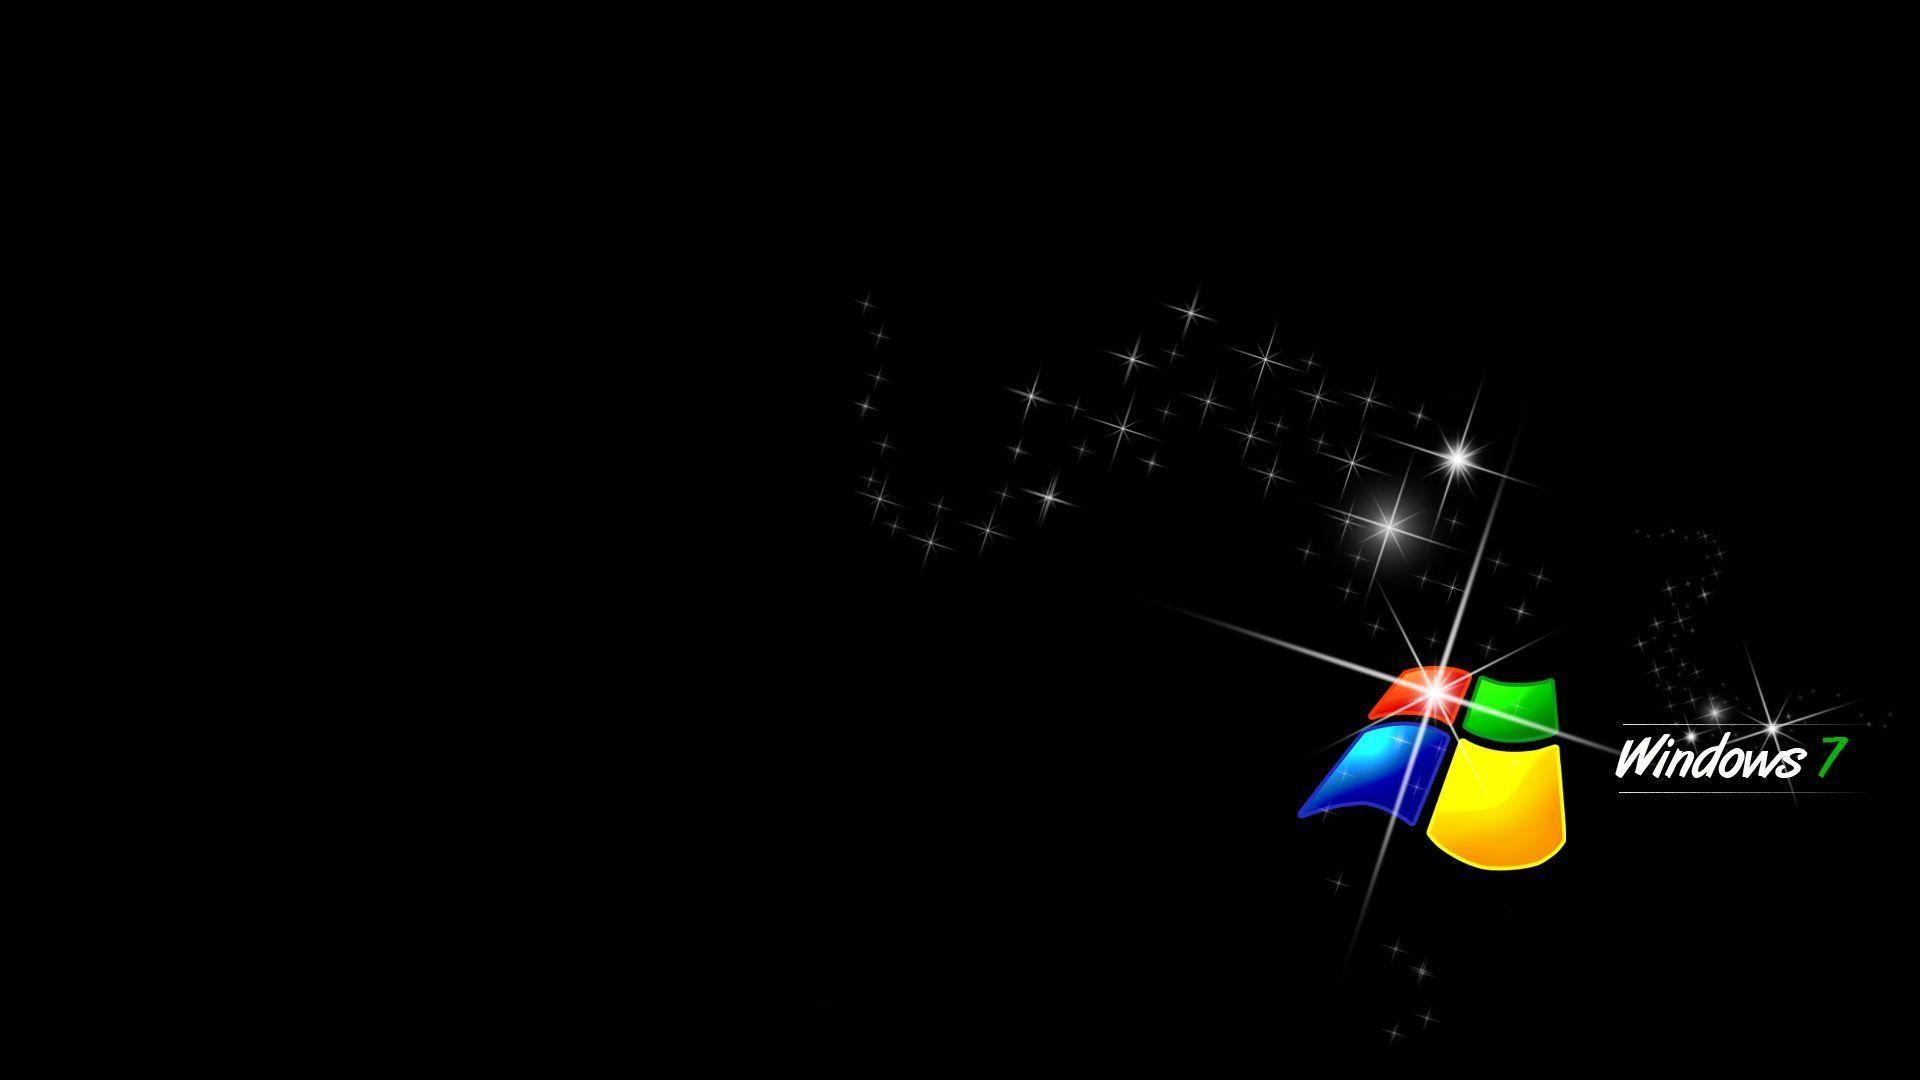 1920x1080 Windows 7 Backgrounds Is Black - Wallpaper Cave